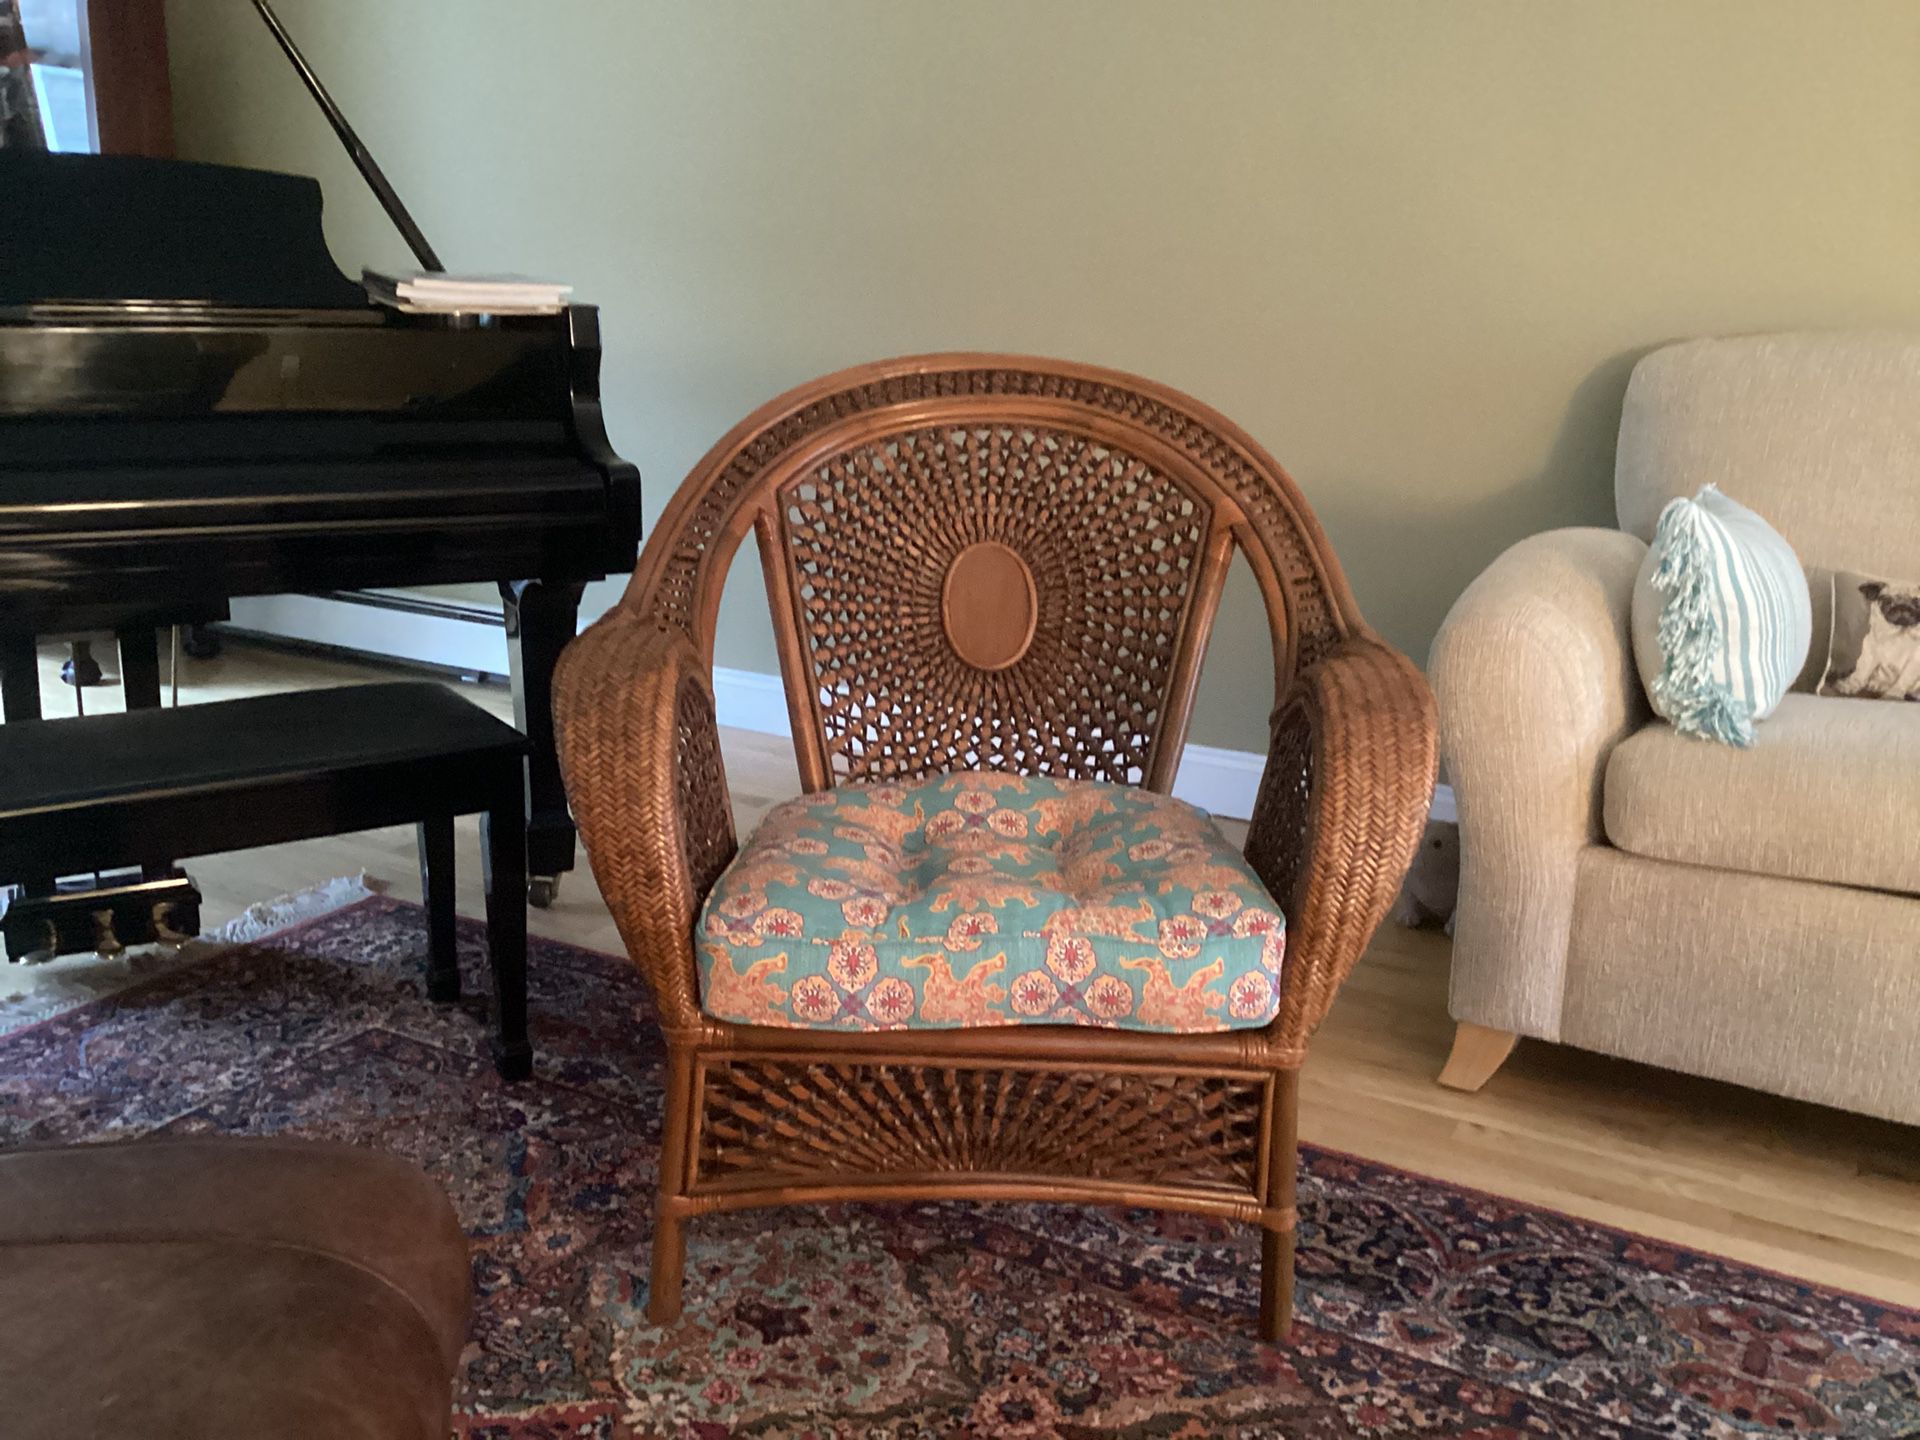 2 Pier One Azteca Chairs and Ottoman